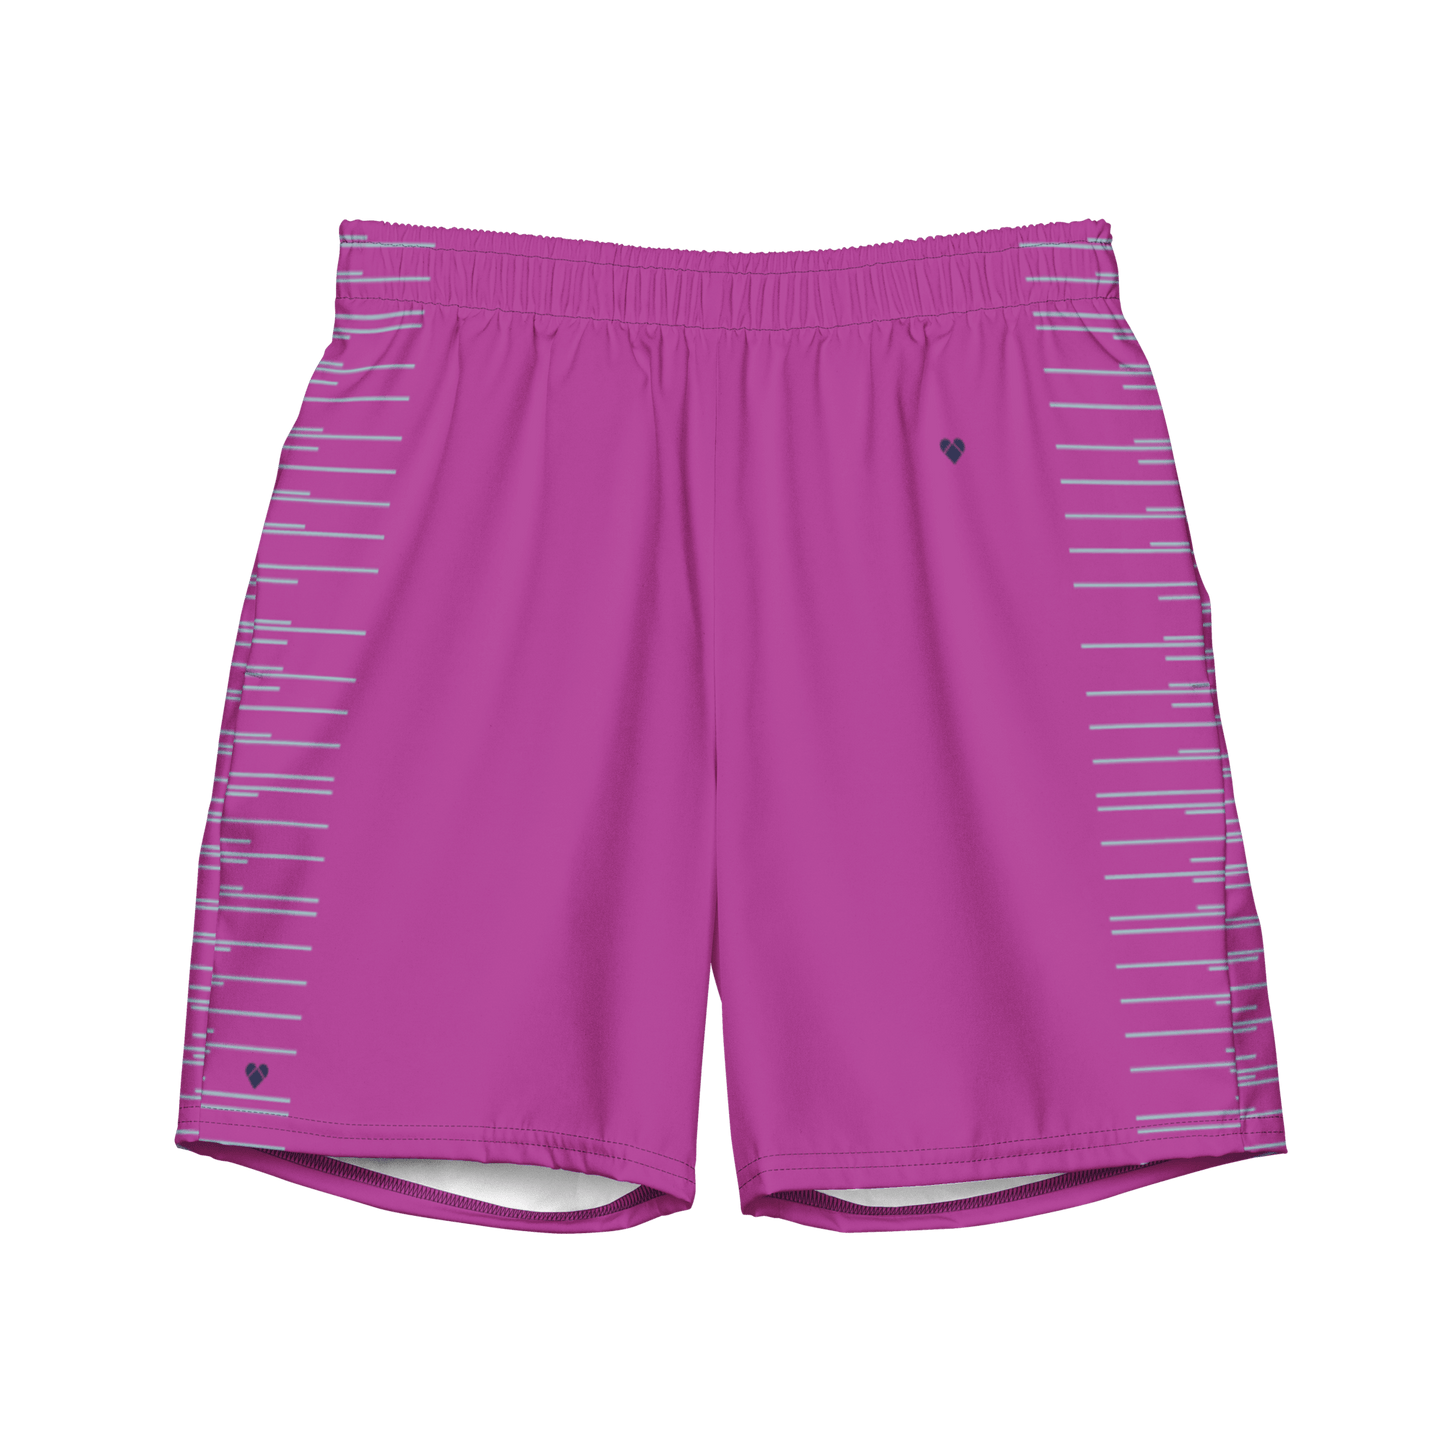 Fucsia Pink Dual Swim Trunks for Men by CRiZ AMOR